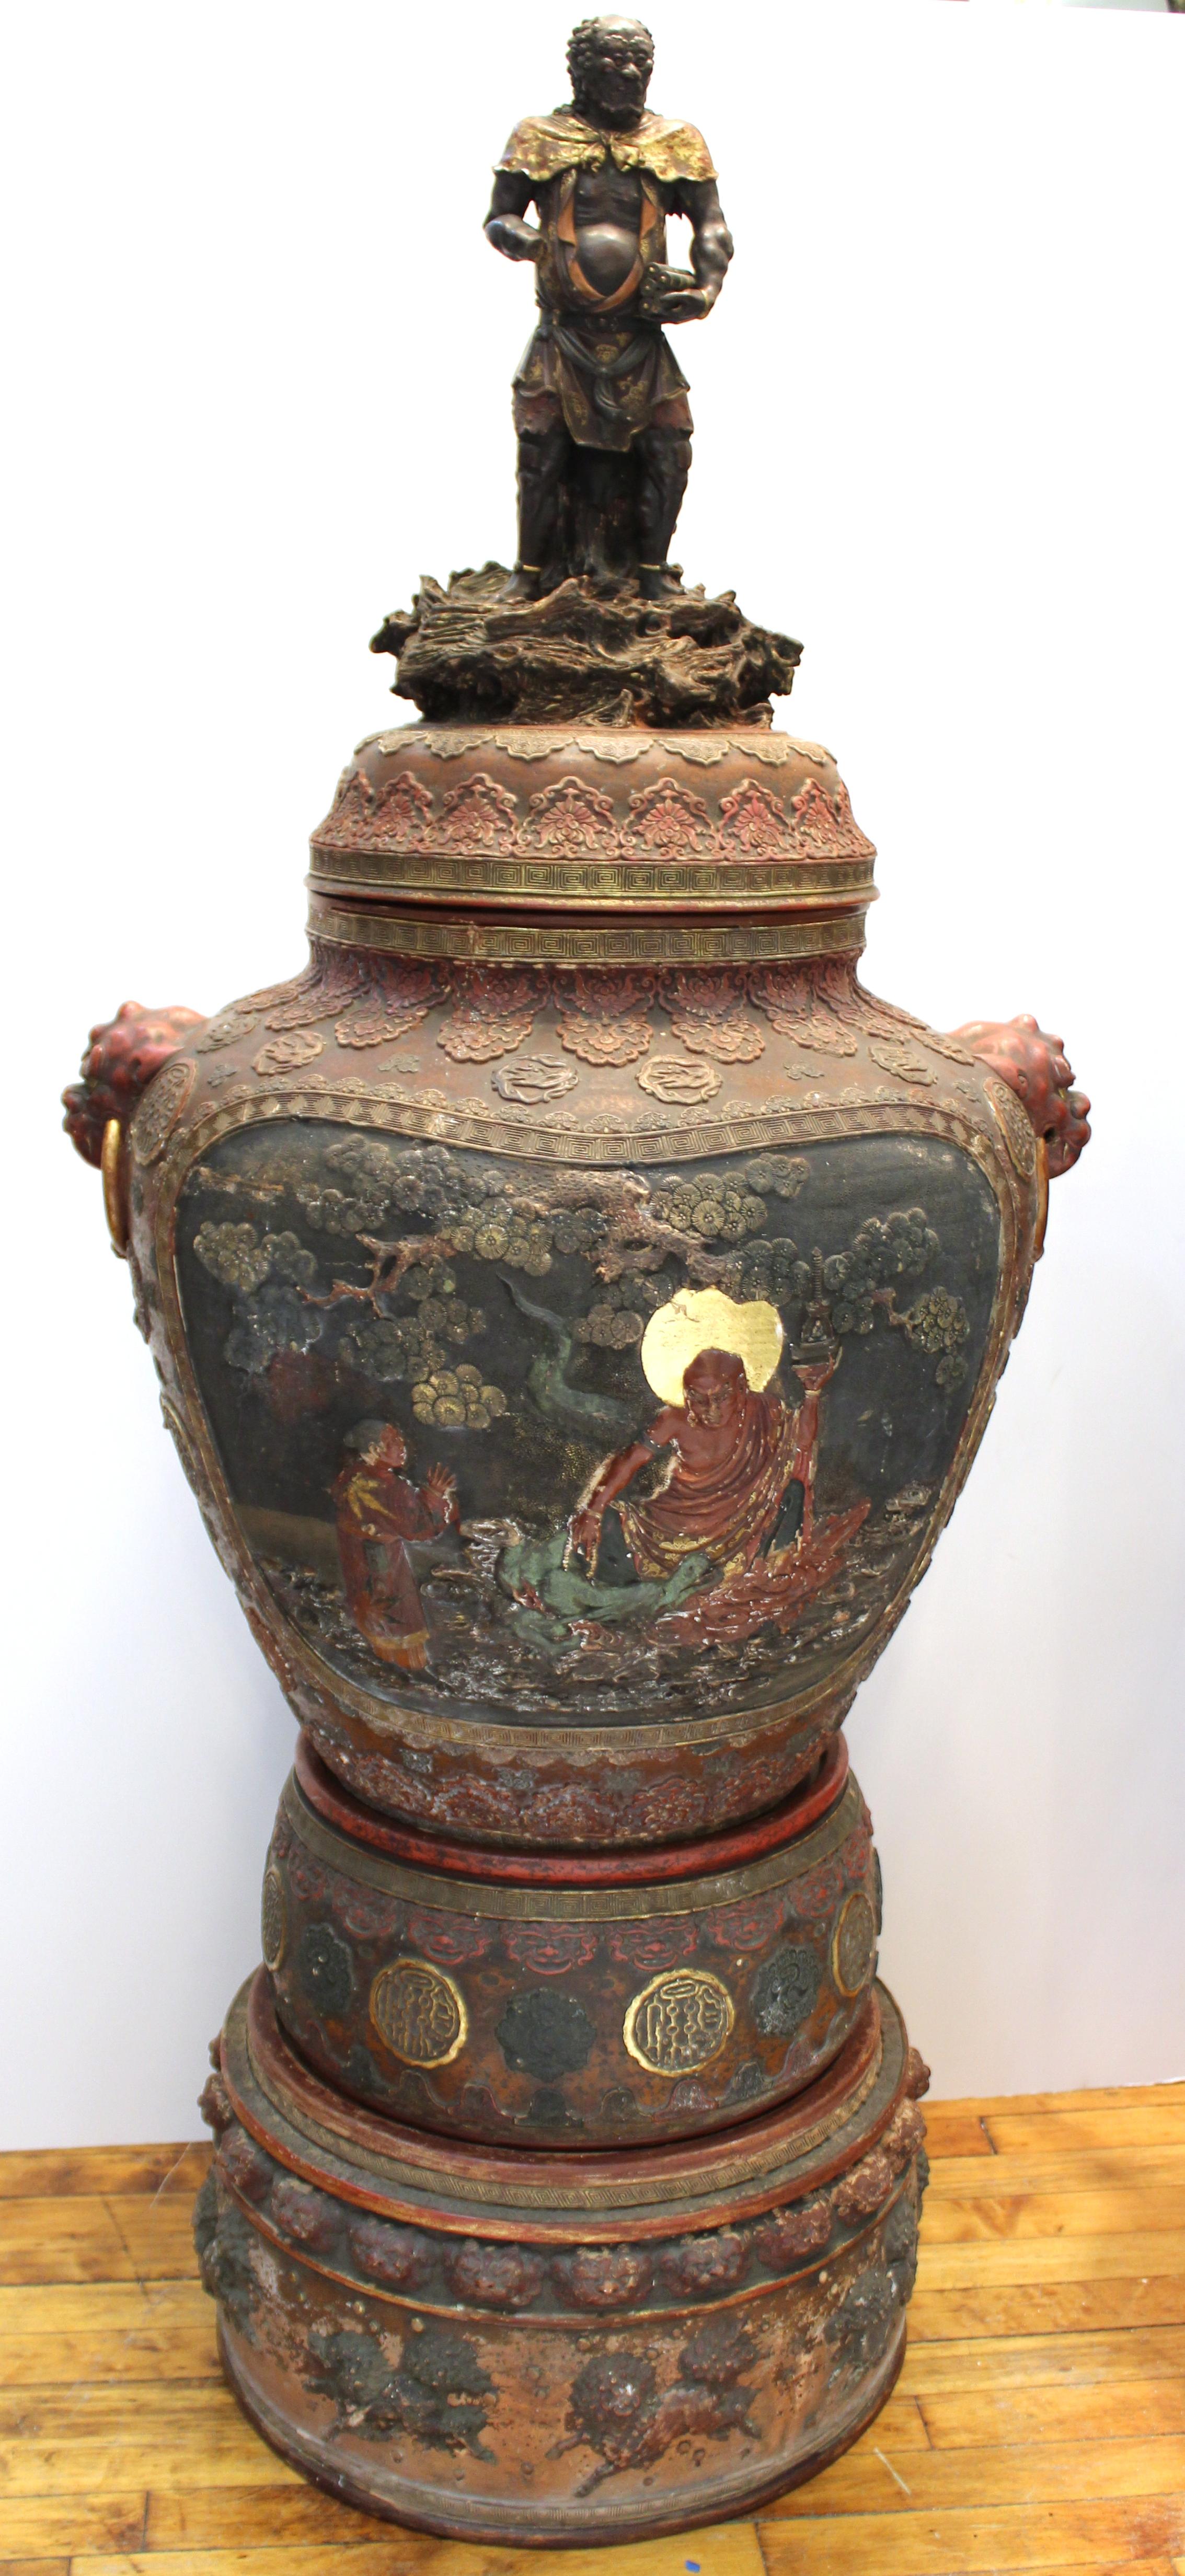 Japanese Meiji Satsuma monumental polychrome vase in terracotta with sculpted lid atop multiple layered Stand. The elaborately decorated piece features large medallions on the front and back with scholarly scenes and grotesque masks as handles on